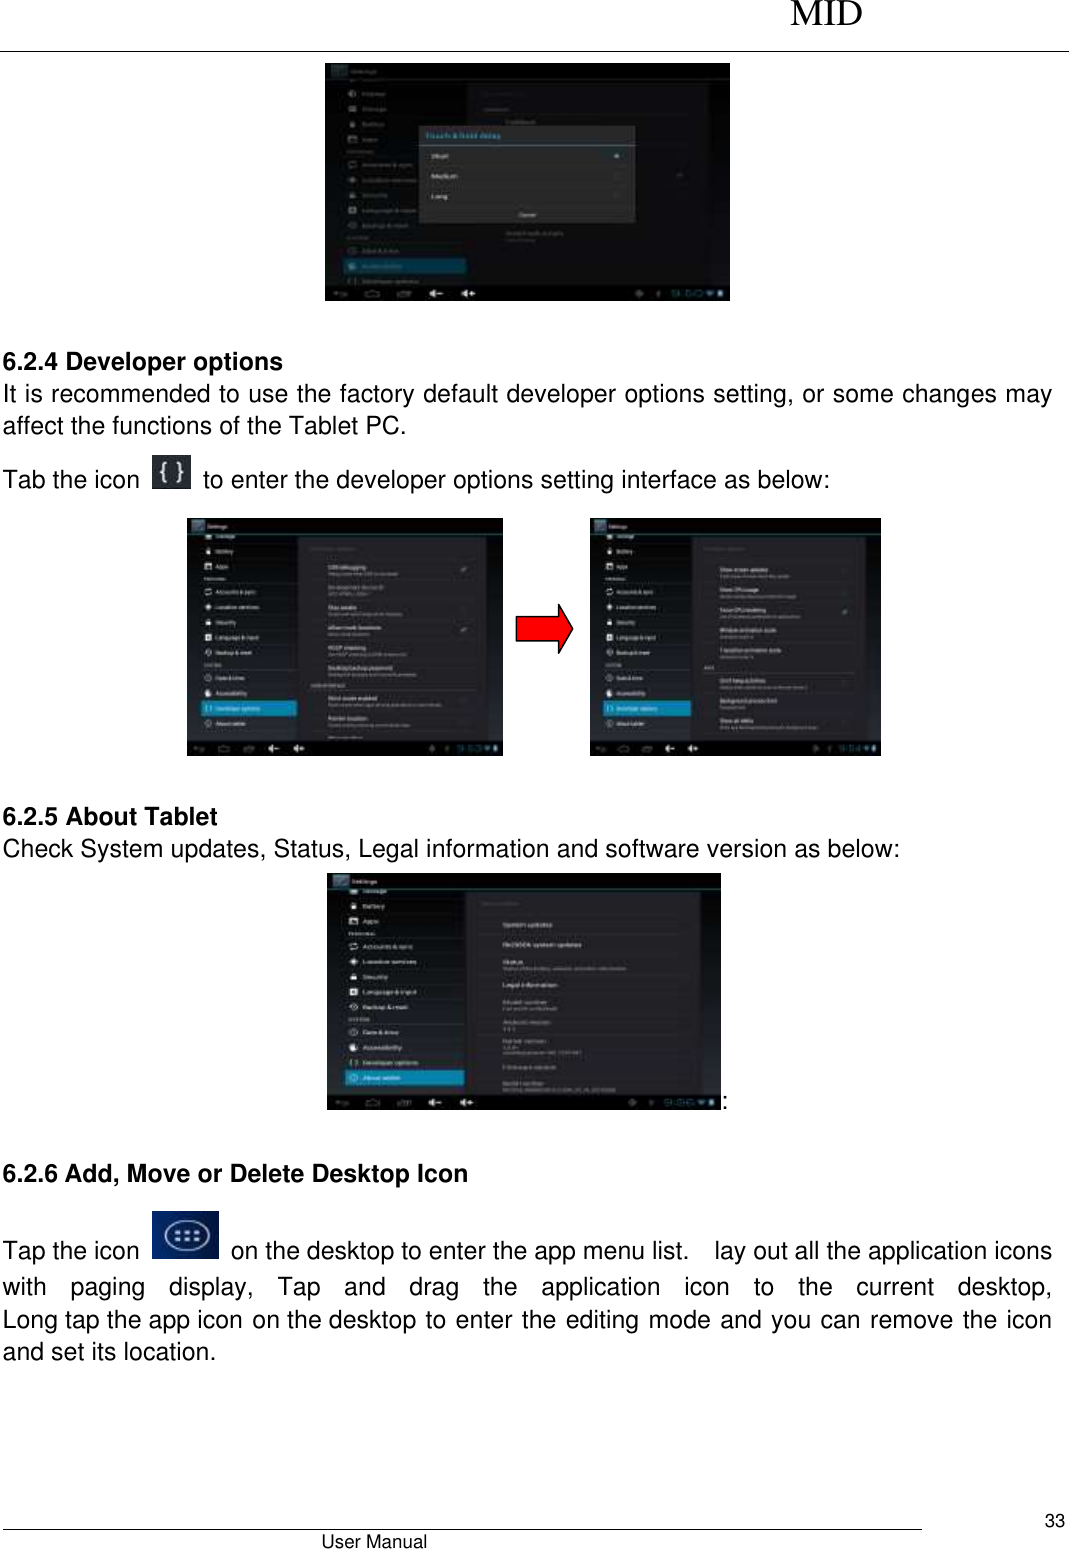      MID                                        User Manual     33   6.2.4 Developer options It is recommended to use the factory default developer options setting, or some changes may affect the functions of the Tablet PC. Tab the icon    to enter the developer options setting interface as below:           6.2.5 About Tablet Check System updates, Status, Legal information and software version as below: : 6.2.6 Add, Move or Delete Desktop Icon Tap the icon    on the desktop to enter the app menu list.    lay out all the application icons with  paging  display,  Tap  and  drag  the  application  icon  to  the  current  desktop, Long tap the app icon on the desktop to enter the editing mode and you can remove the icon and set its location. 